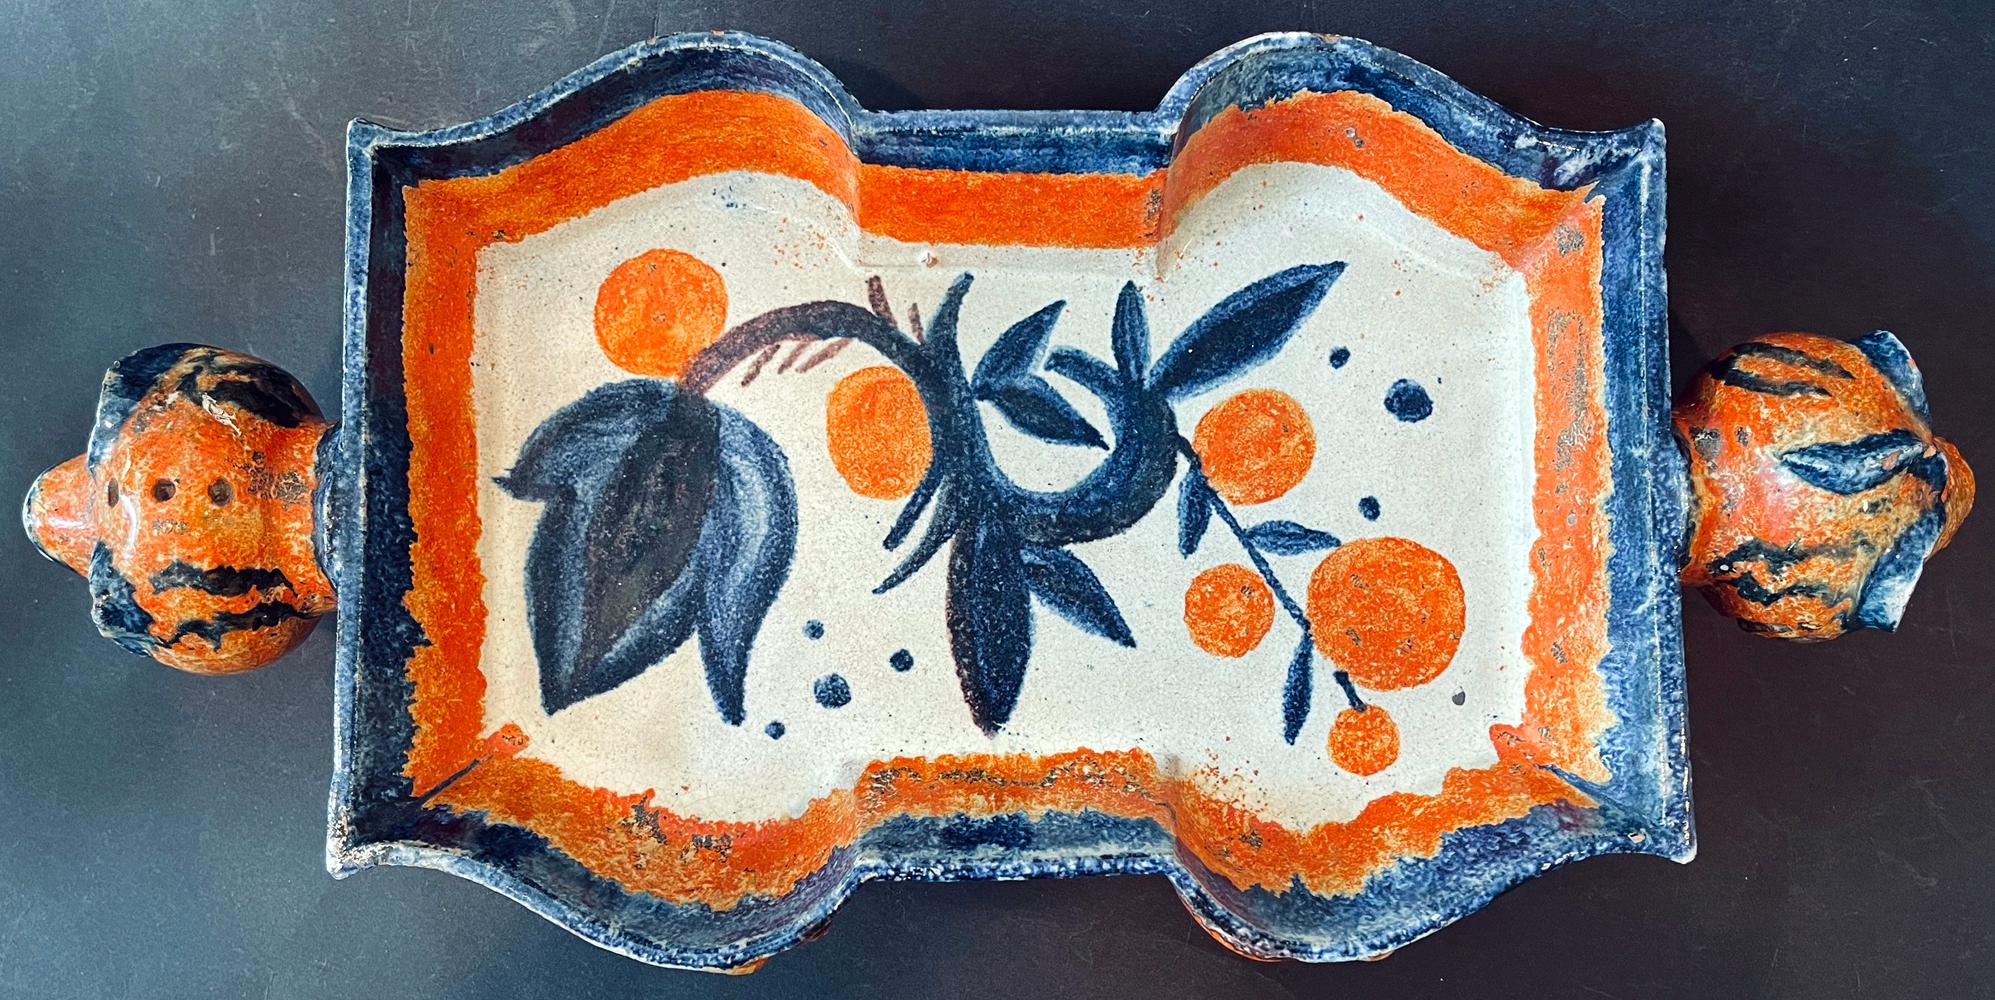 A product of the Wiener Werkstätte or Vienna Workshop -- one of the greatest centers of Modern design to emerge in Europe in the early 20th century -- this unique, vividly glazed ceramic tray was made by Wally (or Vally) Wieselthier. The tray is